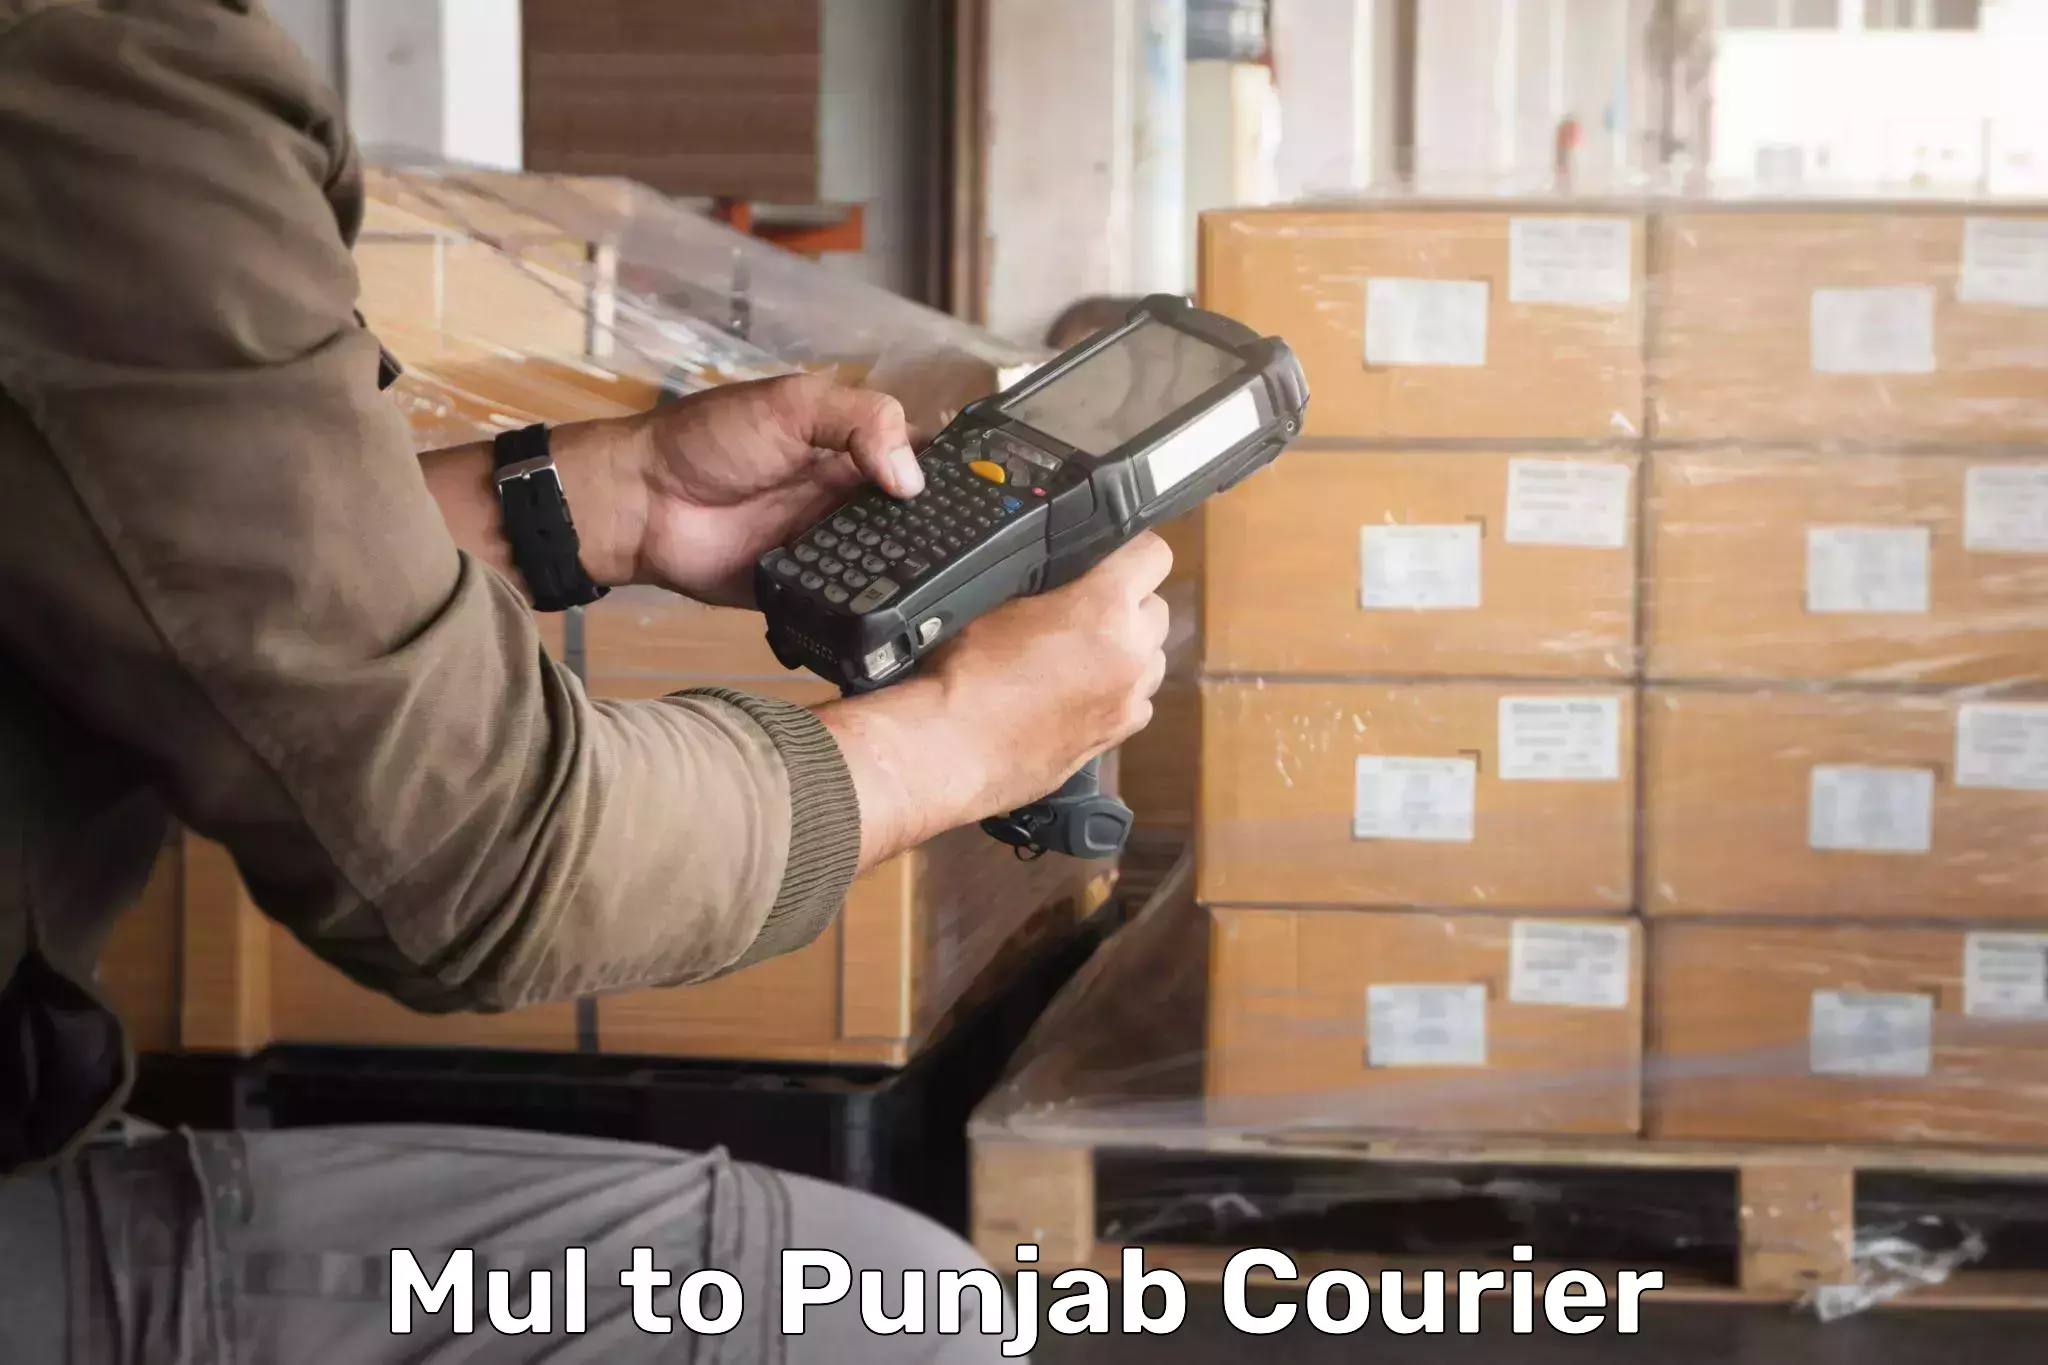 Lightweight courier Mul to Punjab